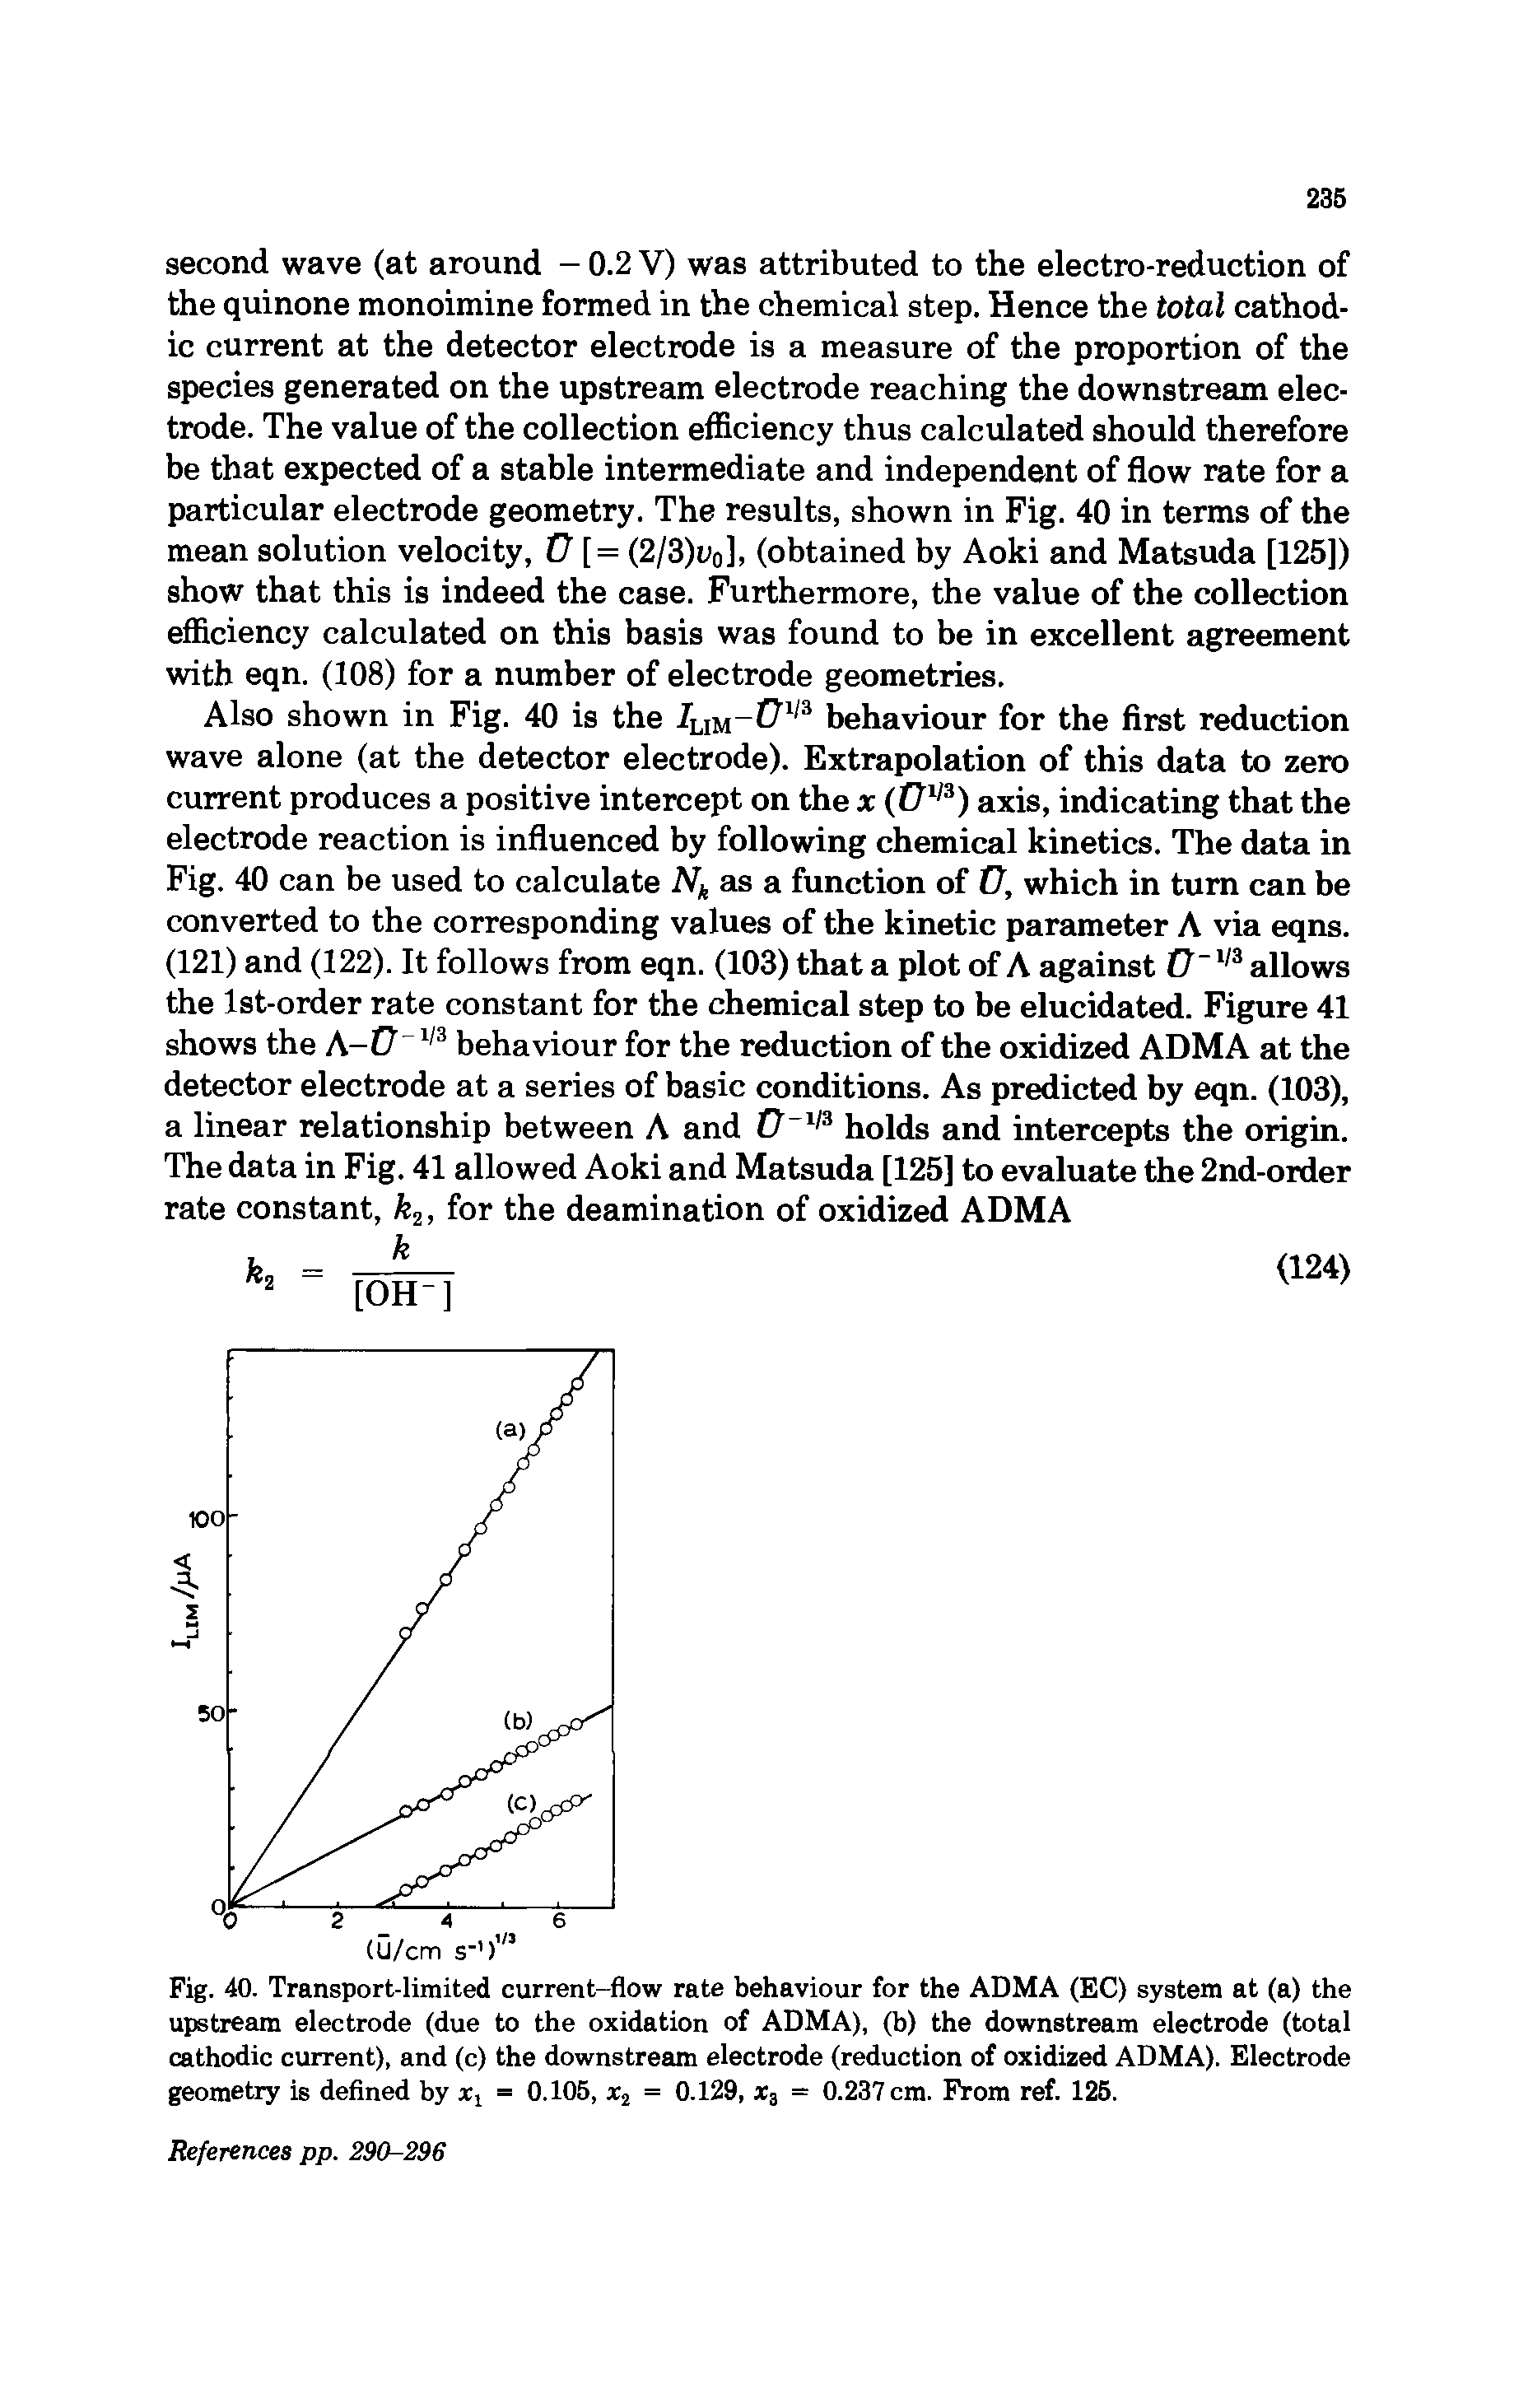 Fig. 40. Transport-limited current-flow rate behaviour for the ADMA (EC) system at (a) the upstream electrode (due to the oxidation of ADMA), (b) the downstream electrode (total cathodic current), and (c) the downstream electrode (reduction of oxidized ADMA). Electrode geometry is defined by x1 = 0.105, x2 = 0.129, x3 - 0.237 cm. From ref. 125.